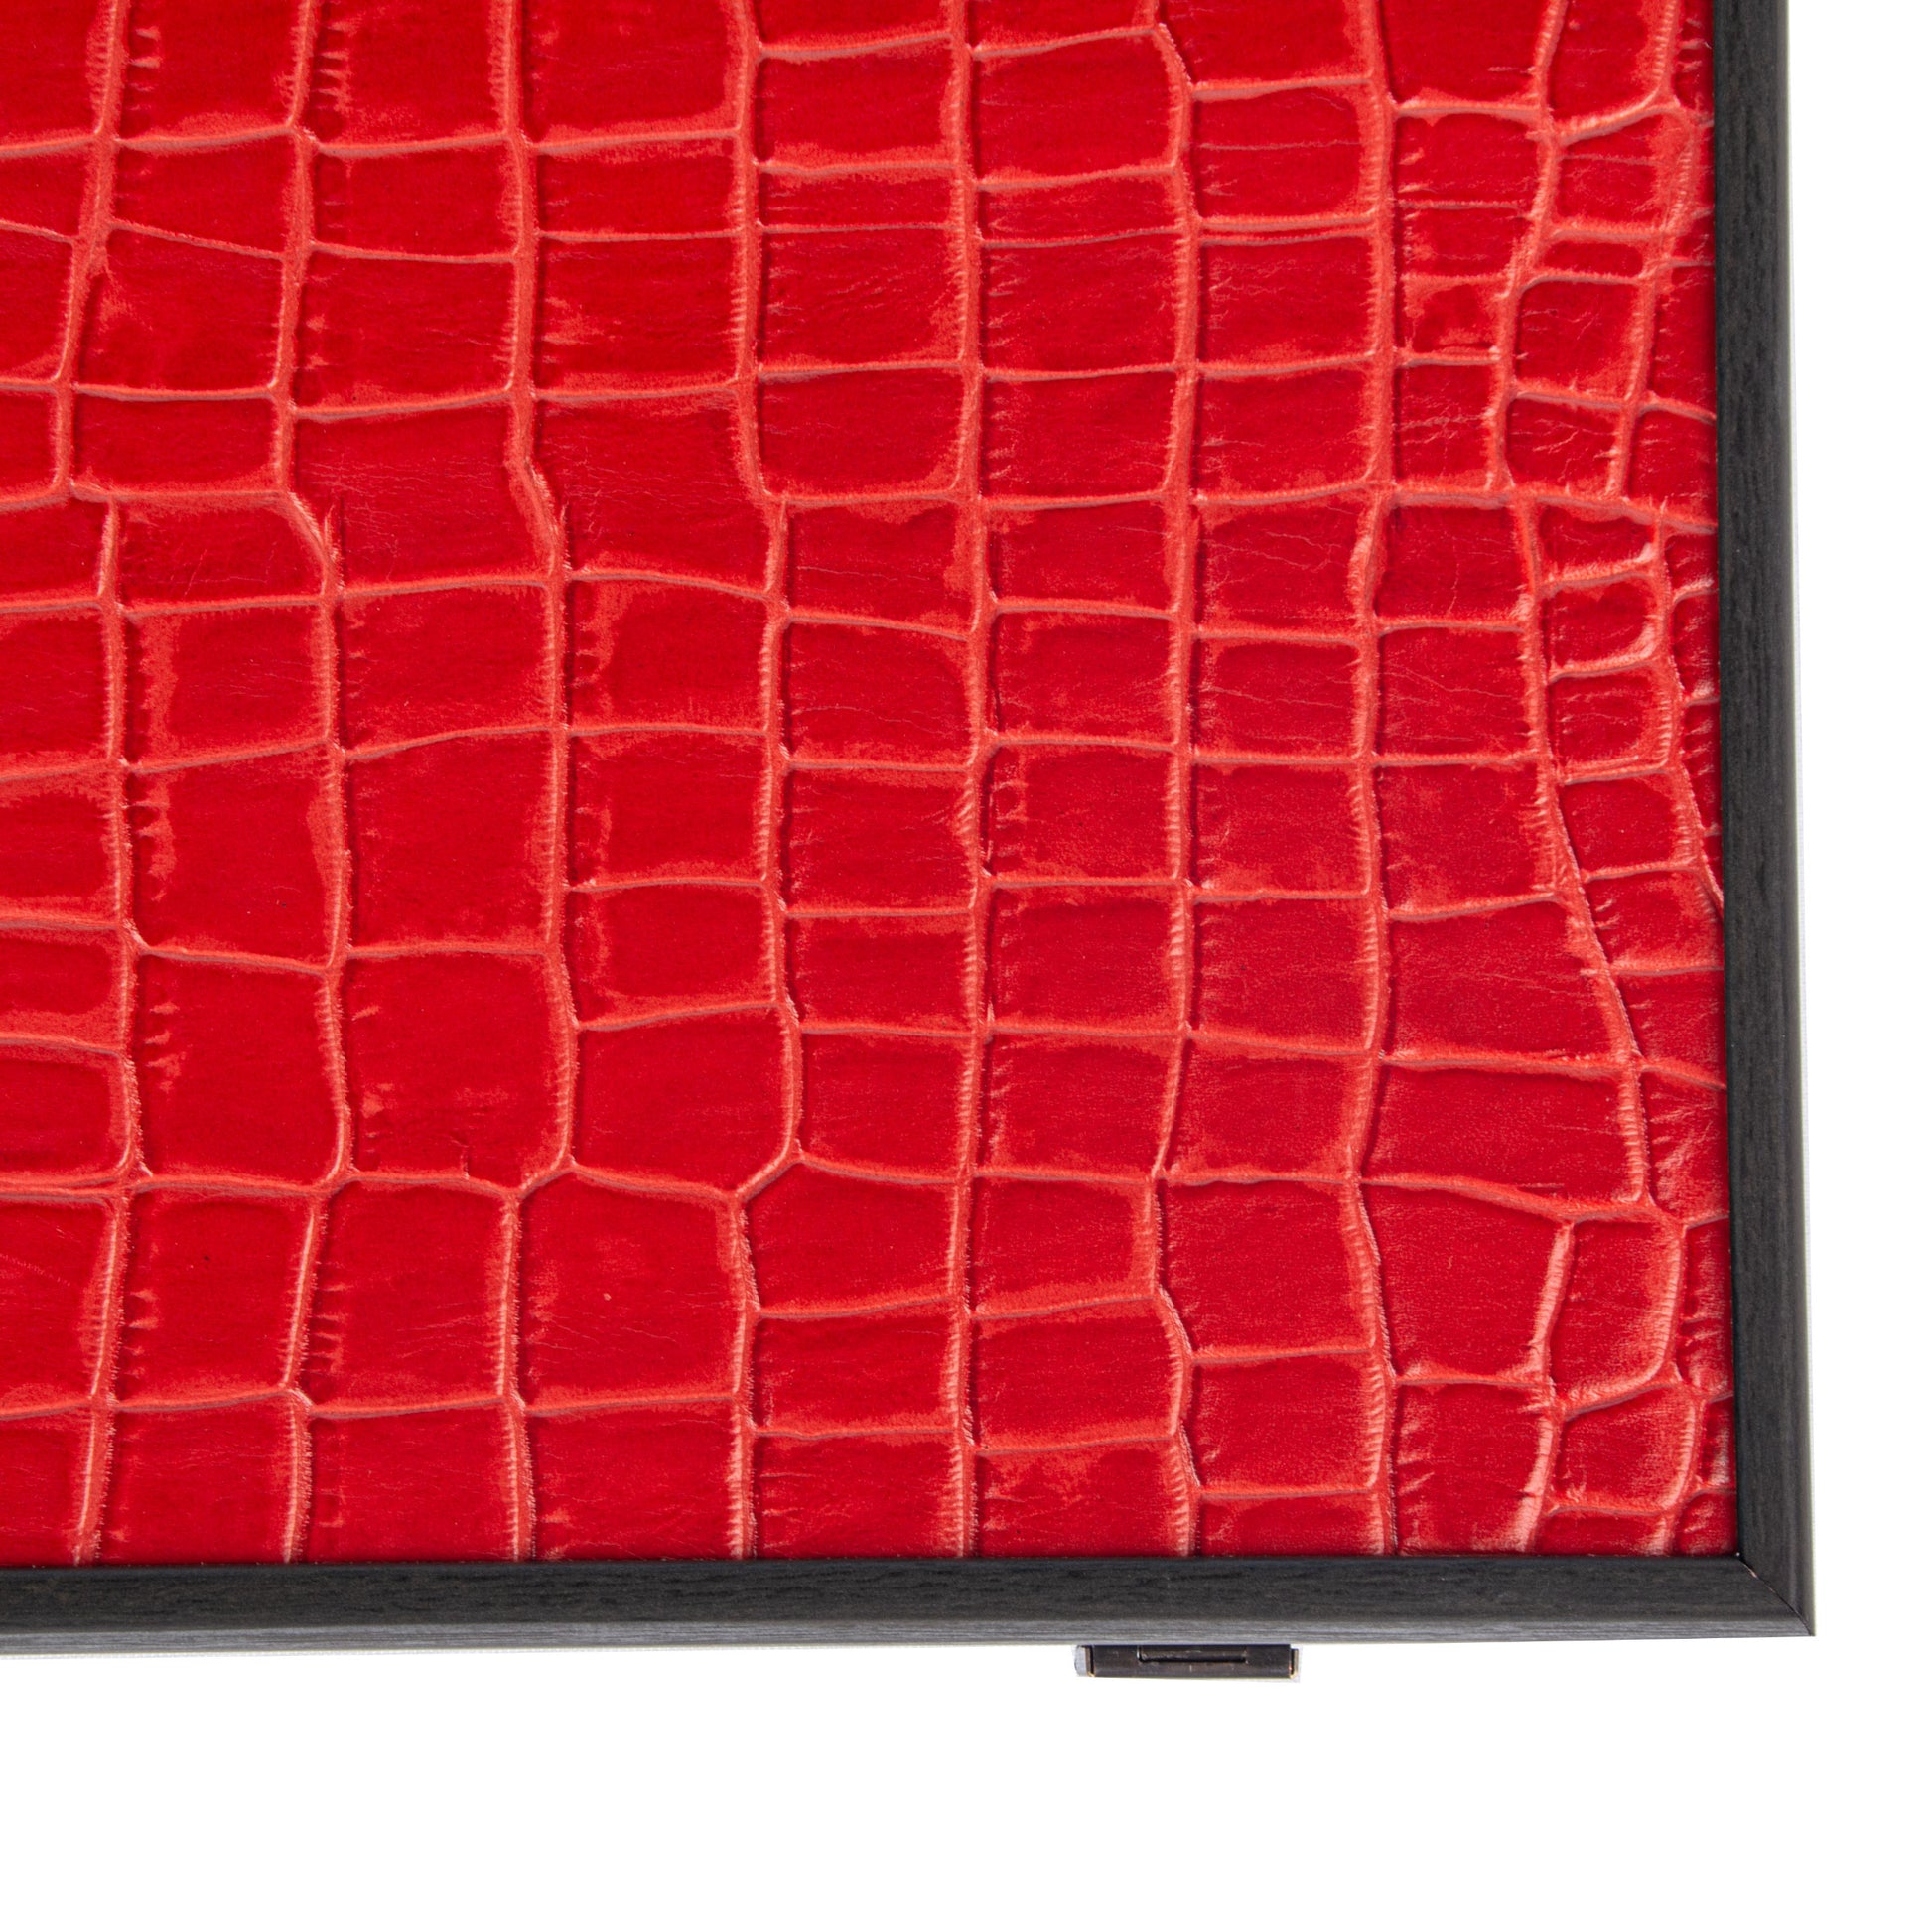 Premium Handcrafted Crocodile Tote in Imperial Red Leather Backgammon Set - Premium Backgammon from MANOPOULOS Chess & Backgammon - Just €425! Shop now at MANOPOULOS Chess & Backgammon